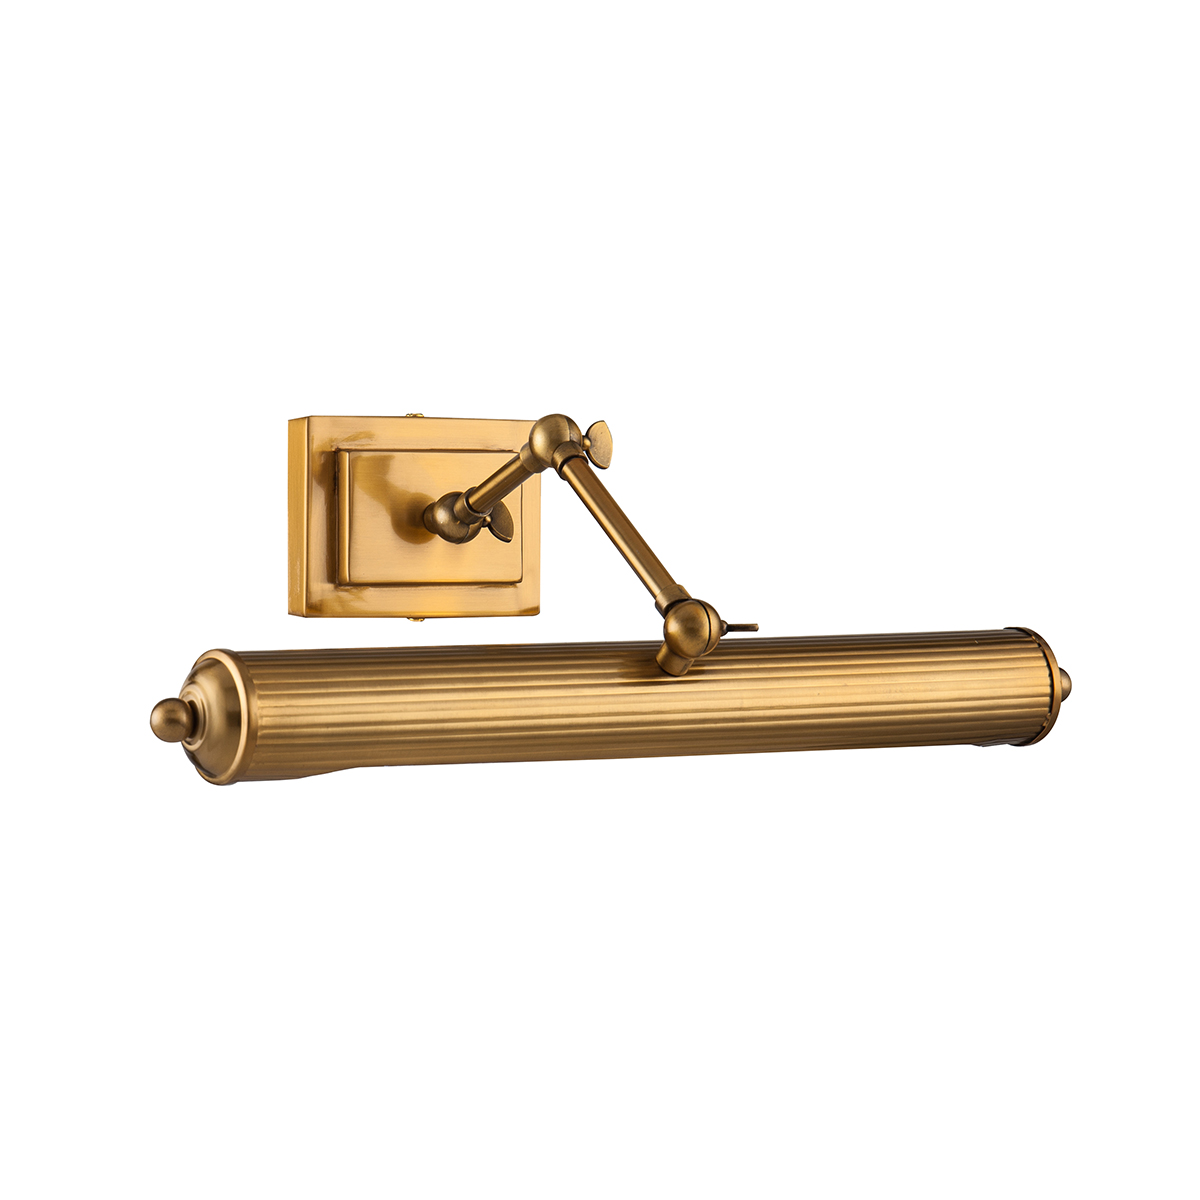    Delight Collection Luca KM0919W-2 brass